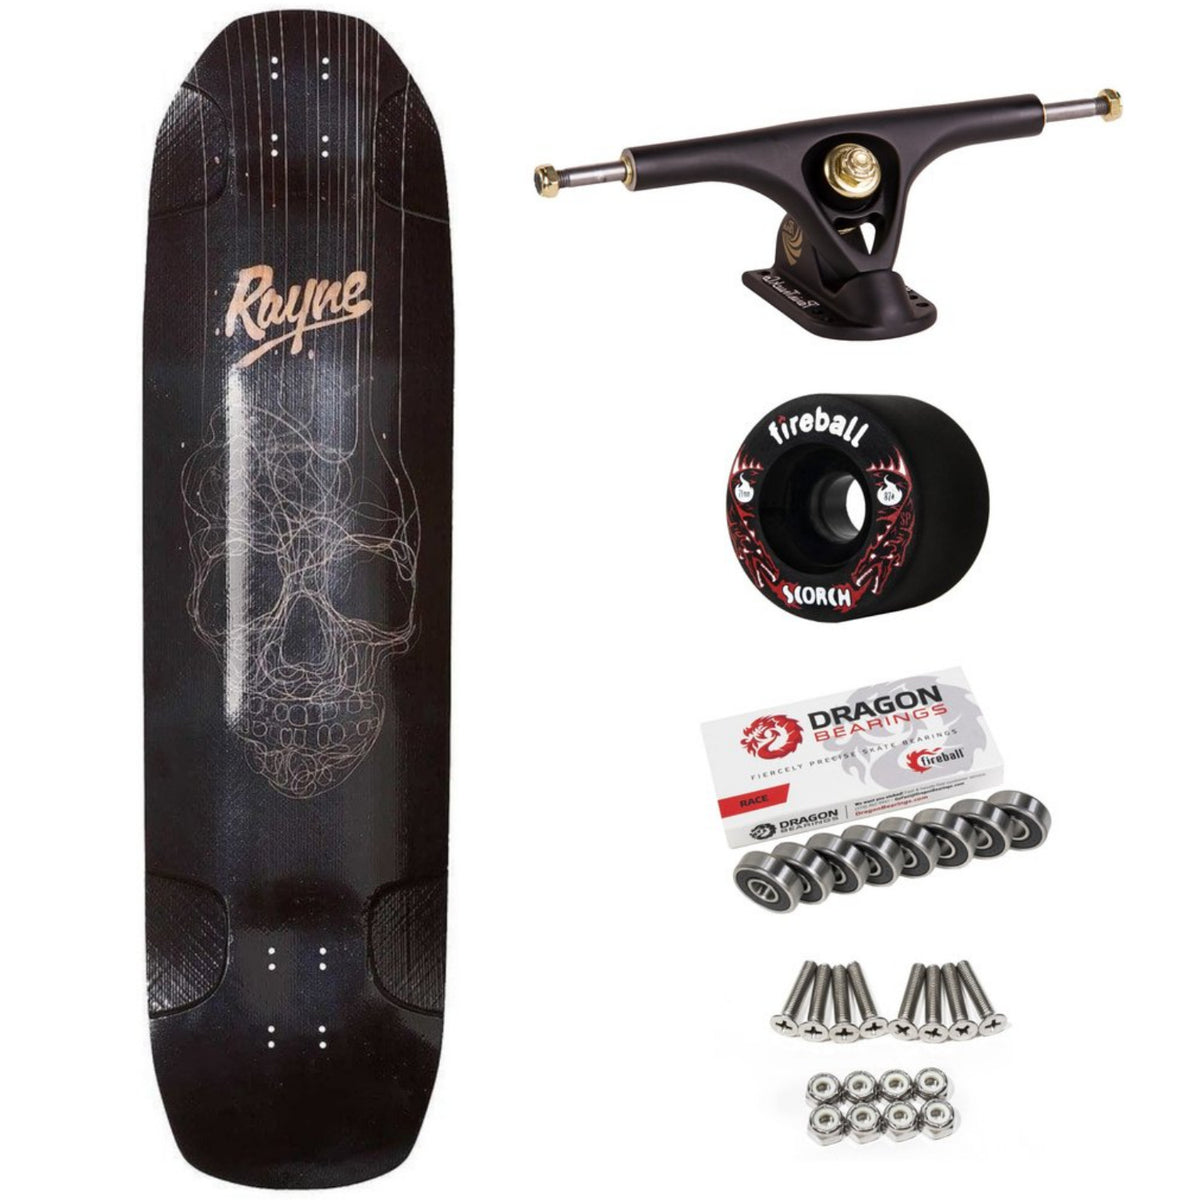 Rayne Darkside Longboard, All Lengths, Deck and Complete